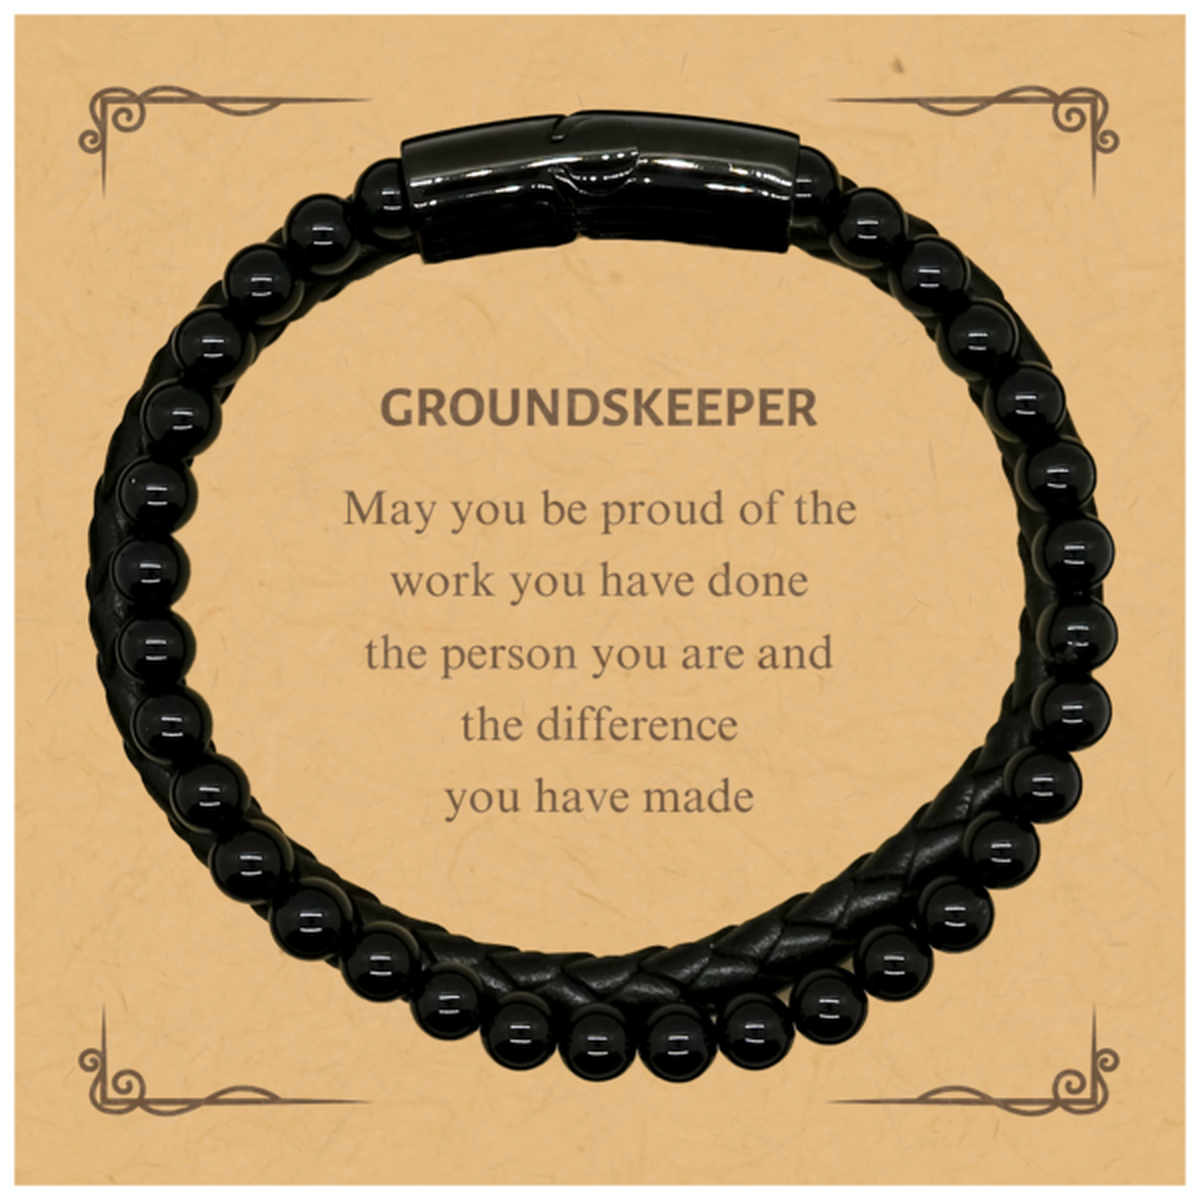 Groundskeeper May you be proud of the work you have done, Retirement Groundskeeper Stone Leather Bracelets for Colleague Appreciation Gifts Amazing for Groundskeeper